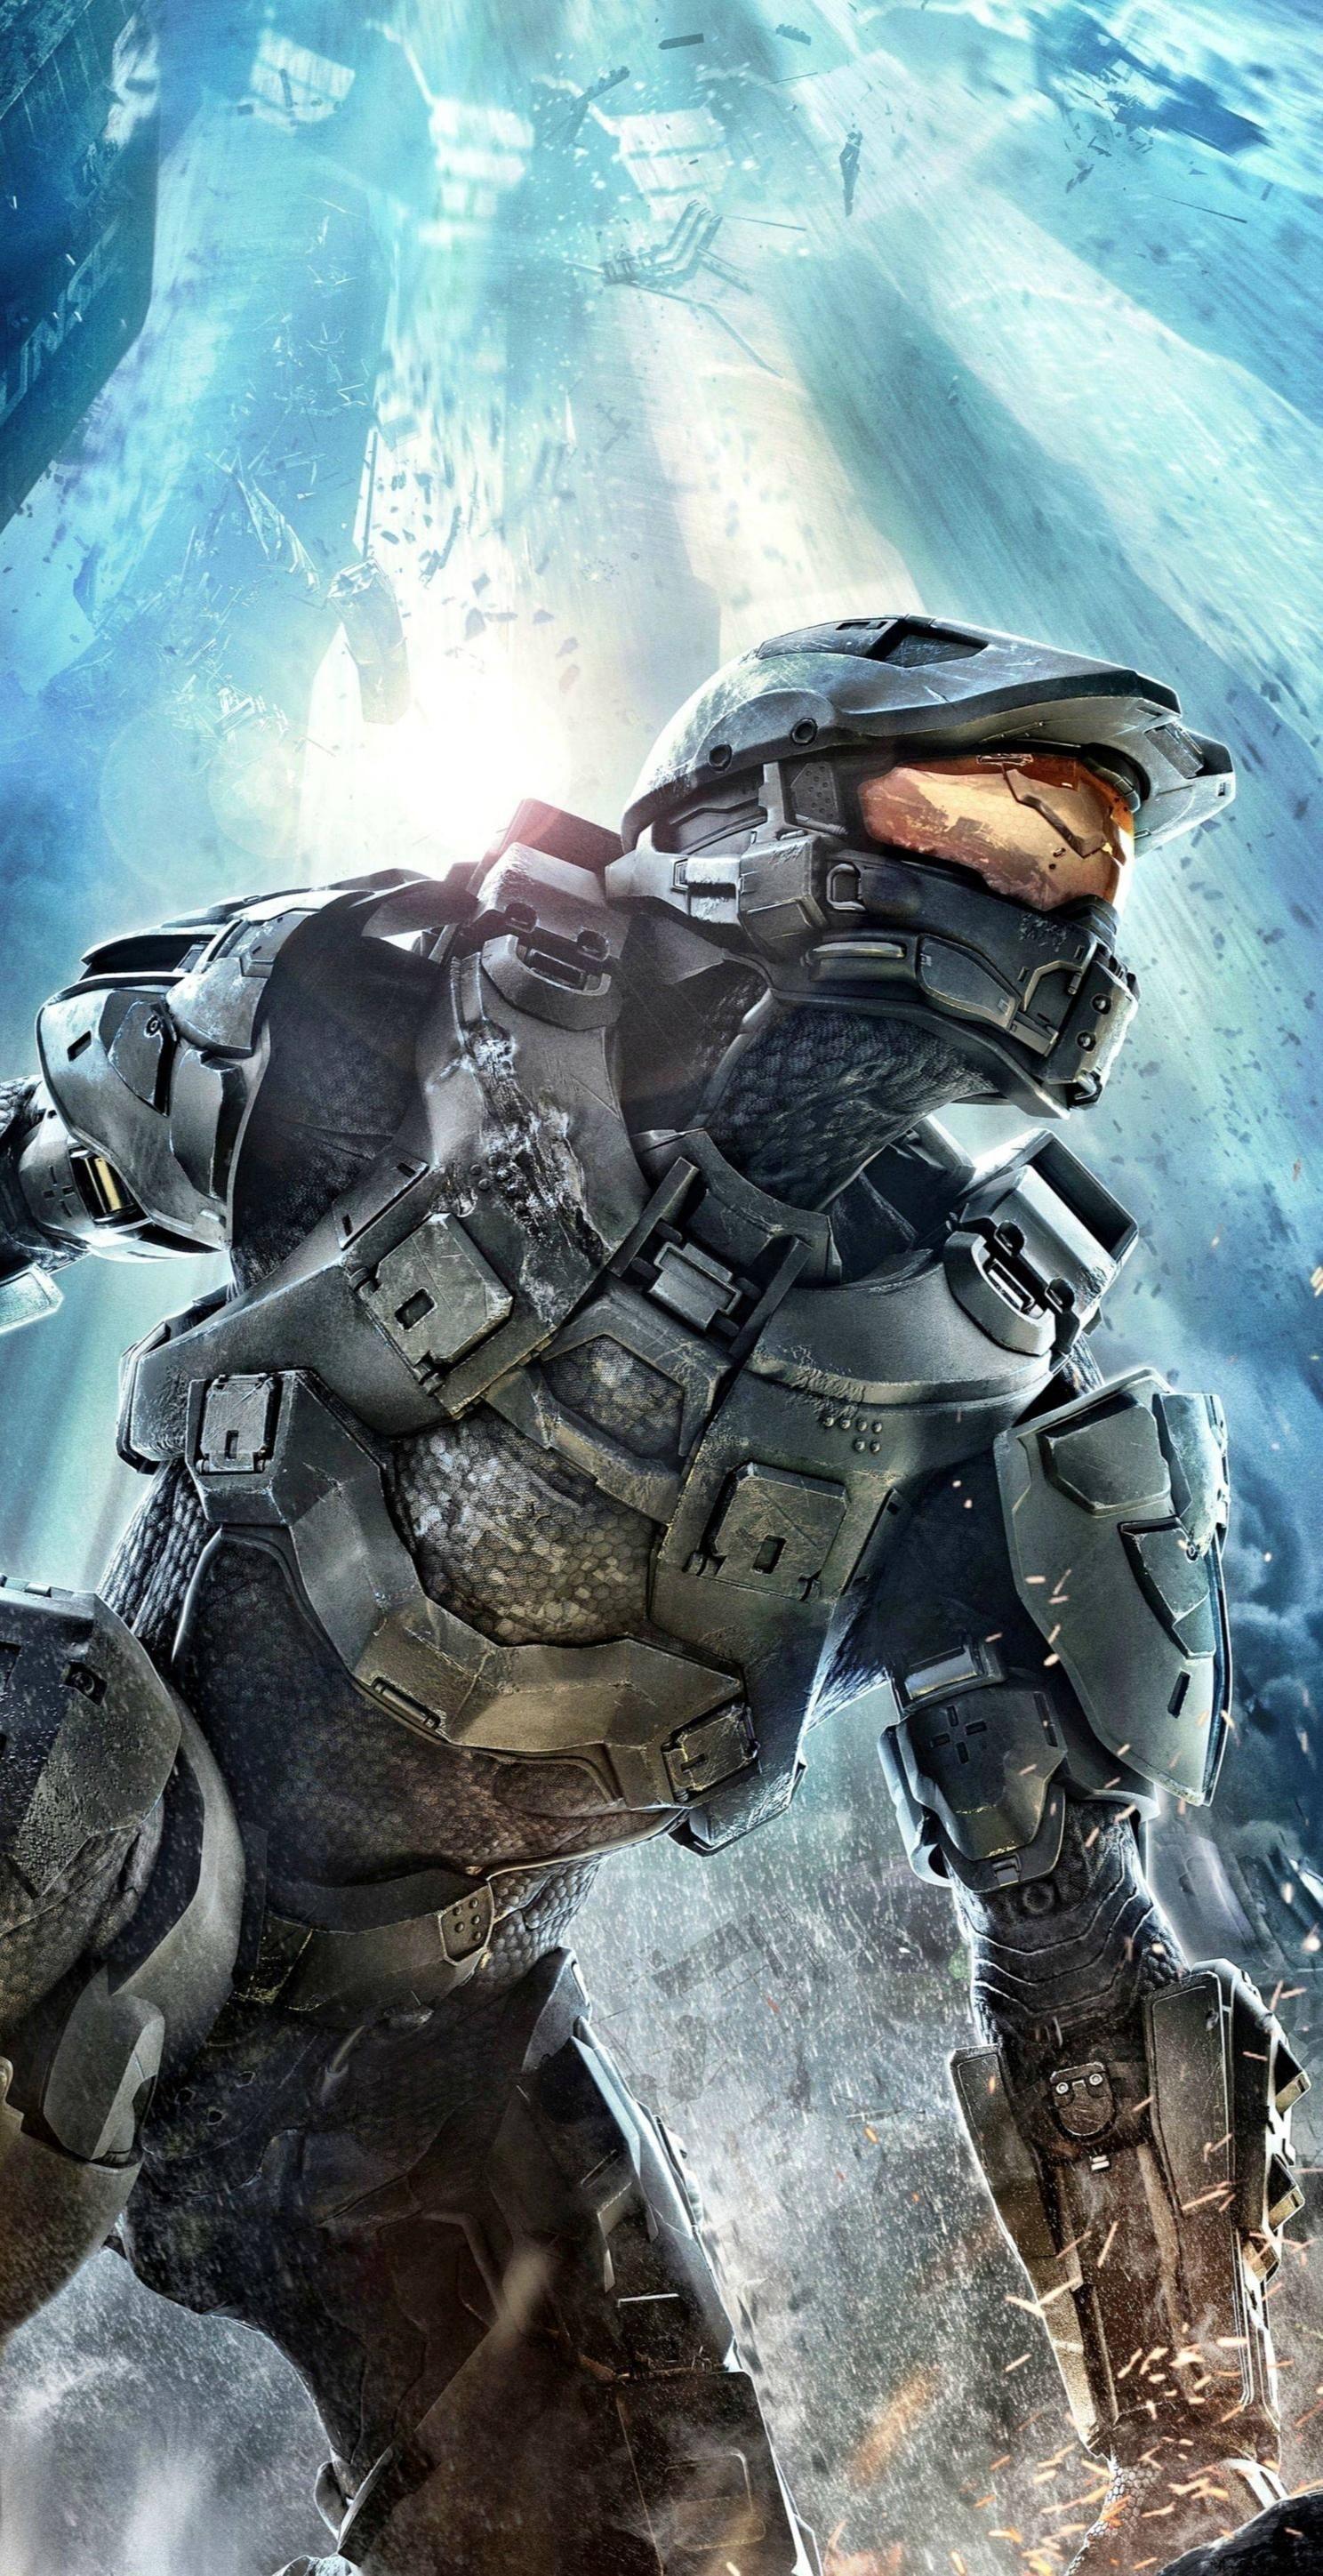 Halo 4 Wallpaper for iPhone 5. Halo. Halo, Halo game